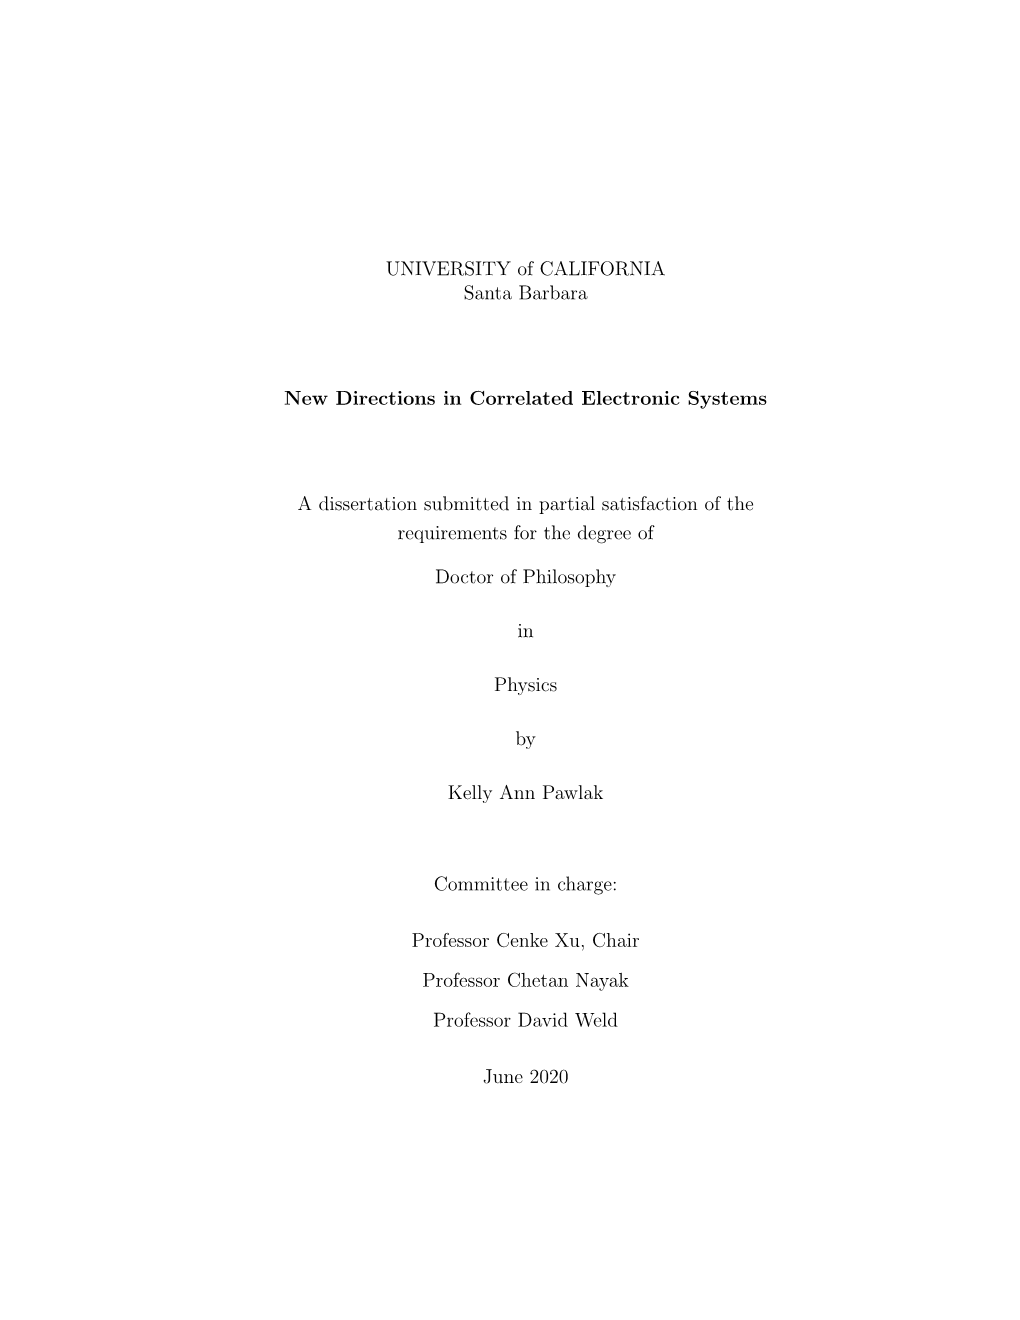 New Directions in Correlated Electronic Systems